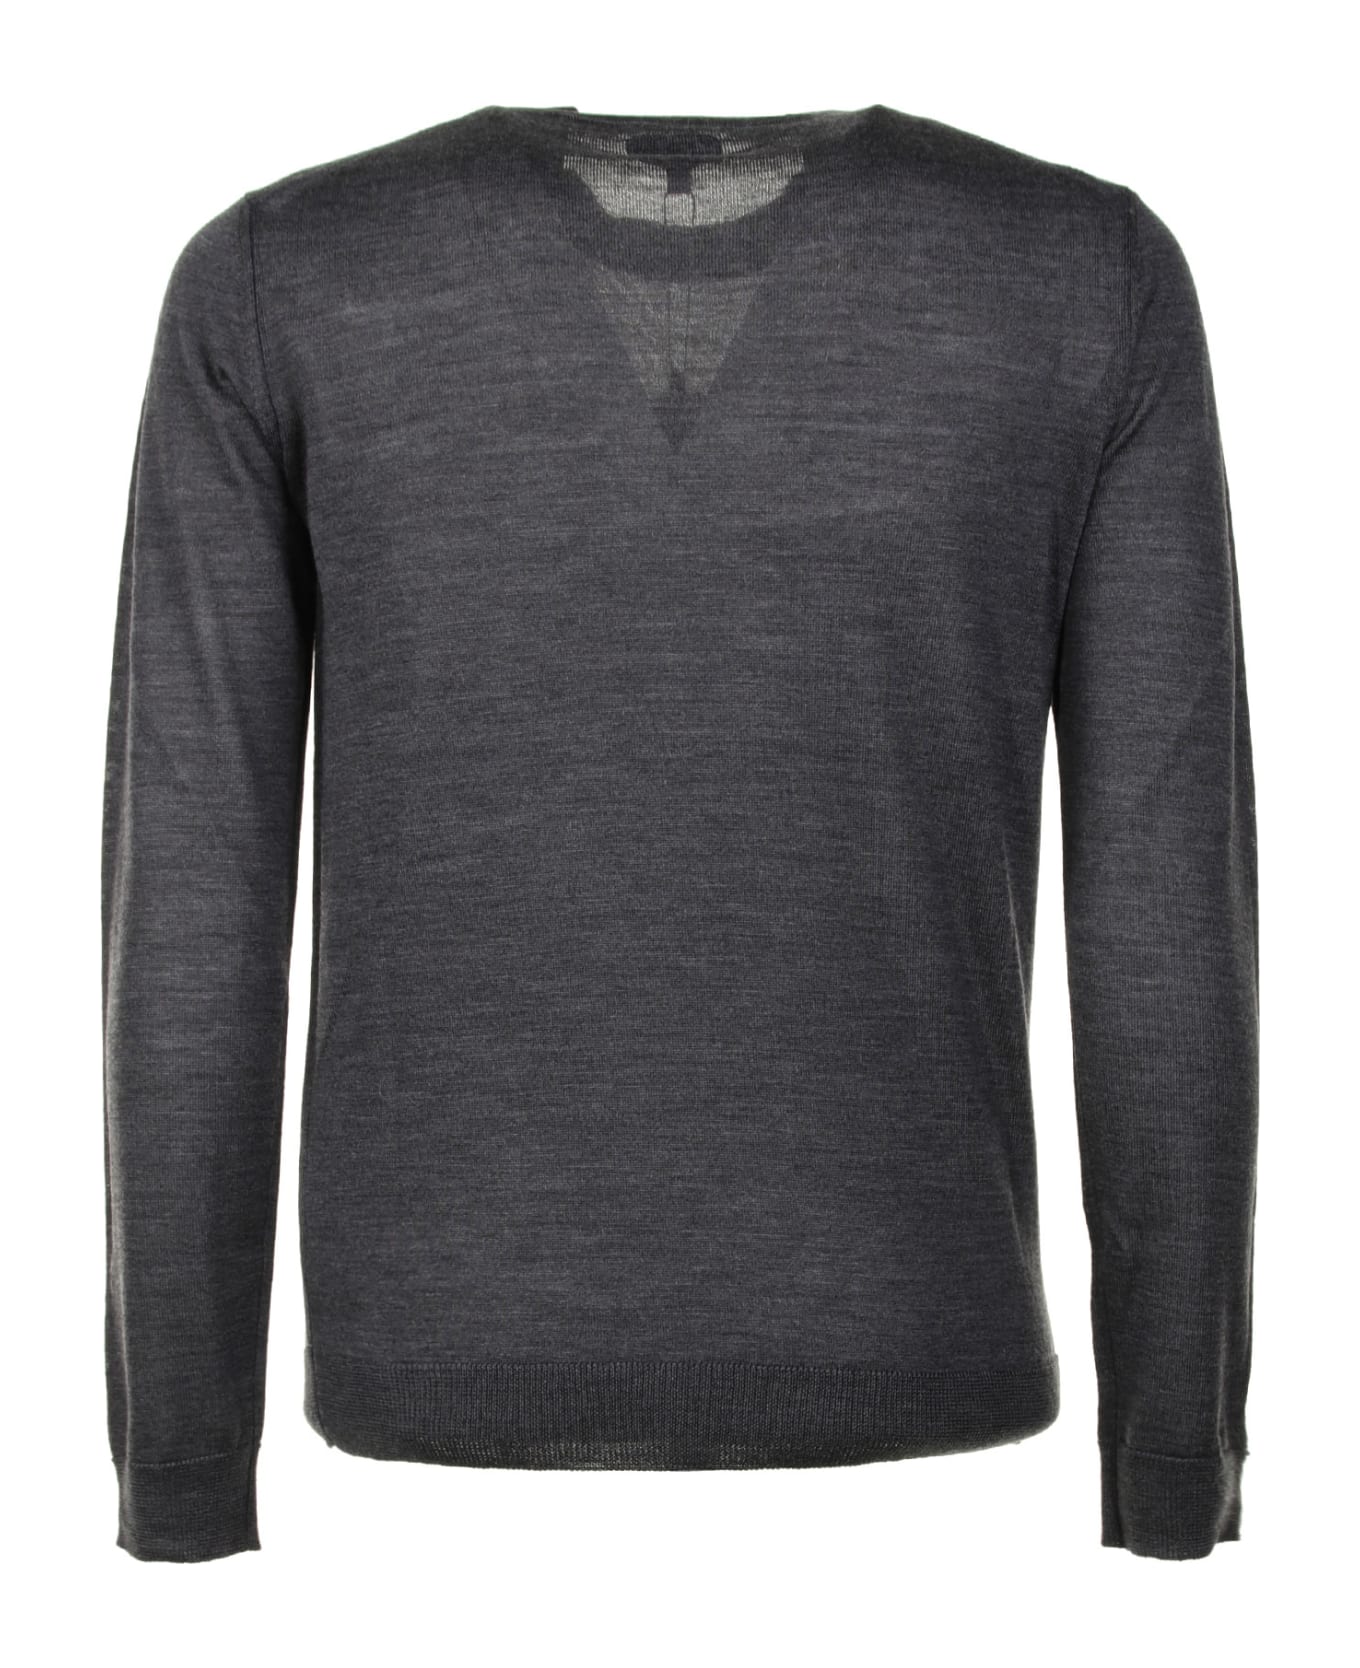 Woolrich Crewneck Sweater - CHARCOAL